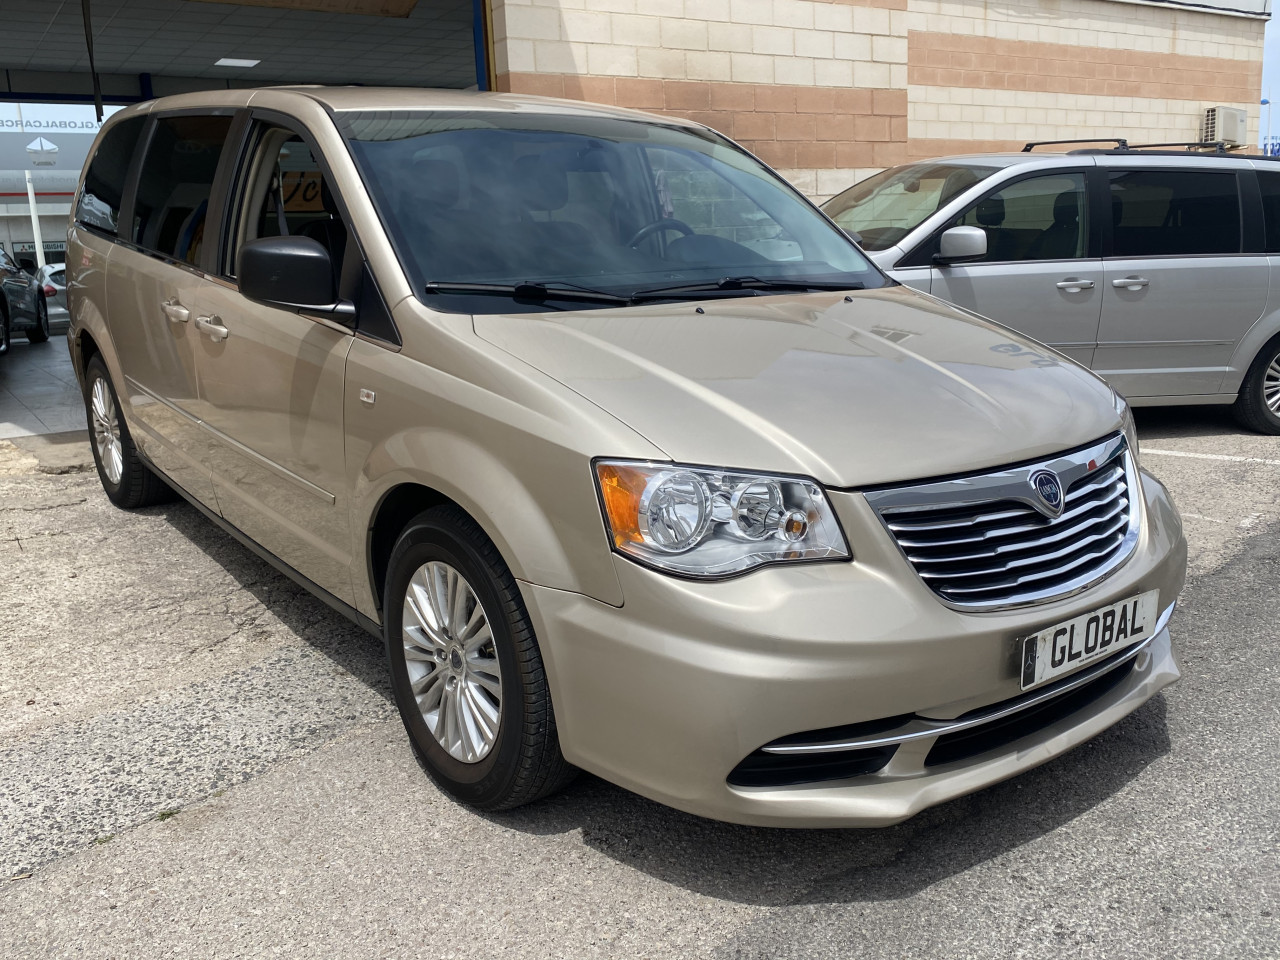 Lancia Grand Voyager 2.8 Crdi Automatic People carrier